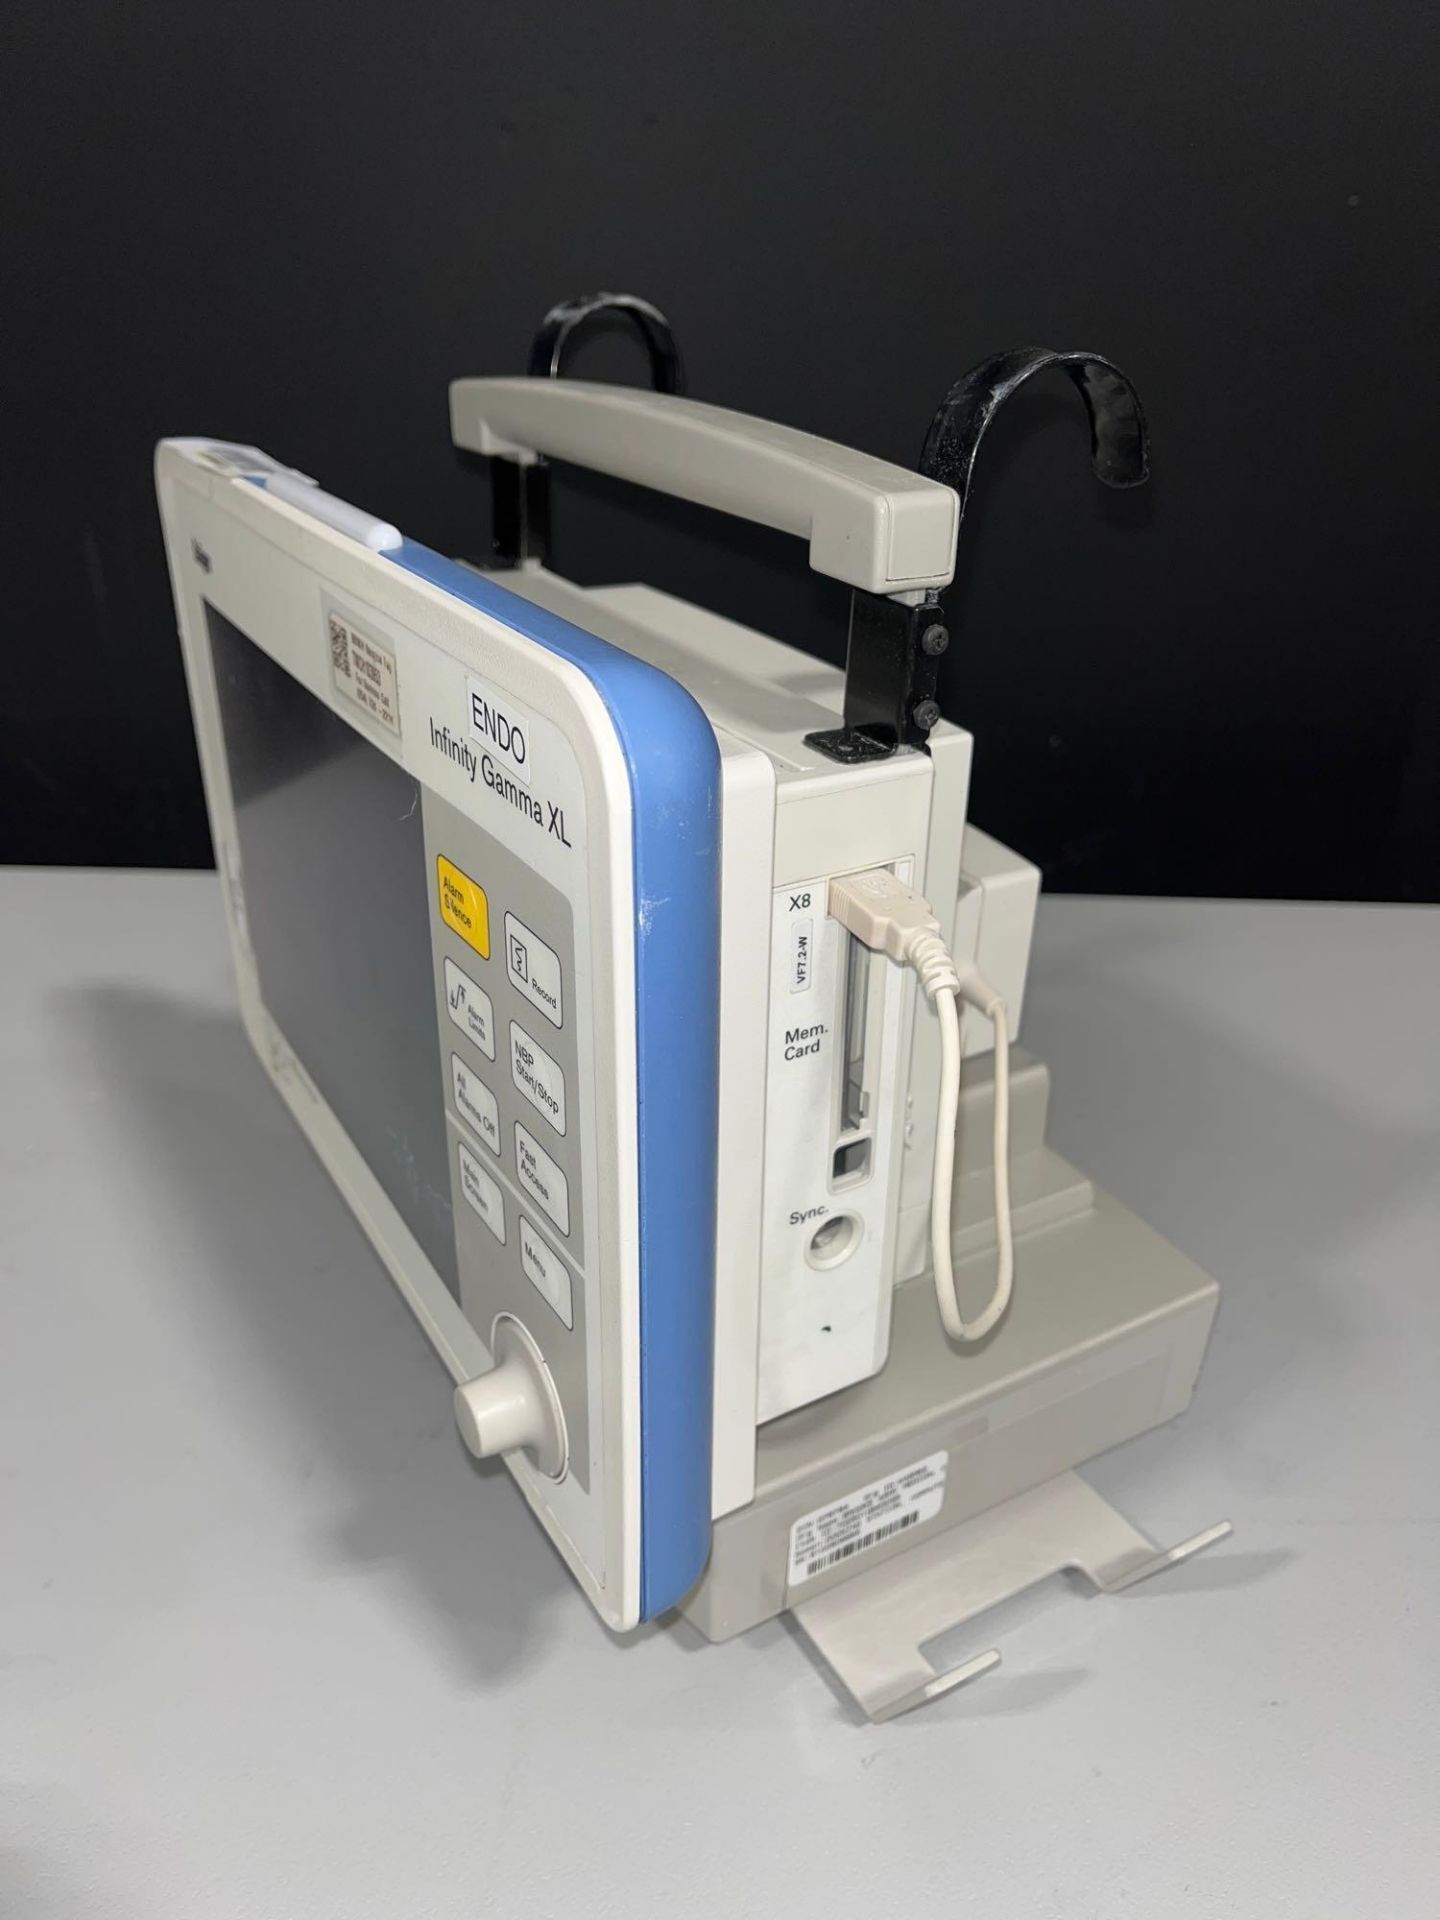 DRAGER INFINITY GAMMA XL PATIENT MONITOR - Image 4 of 6